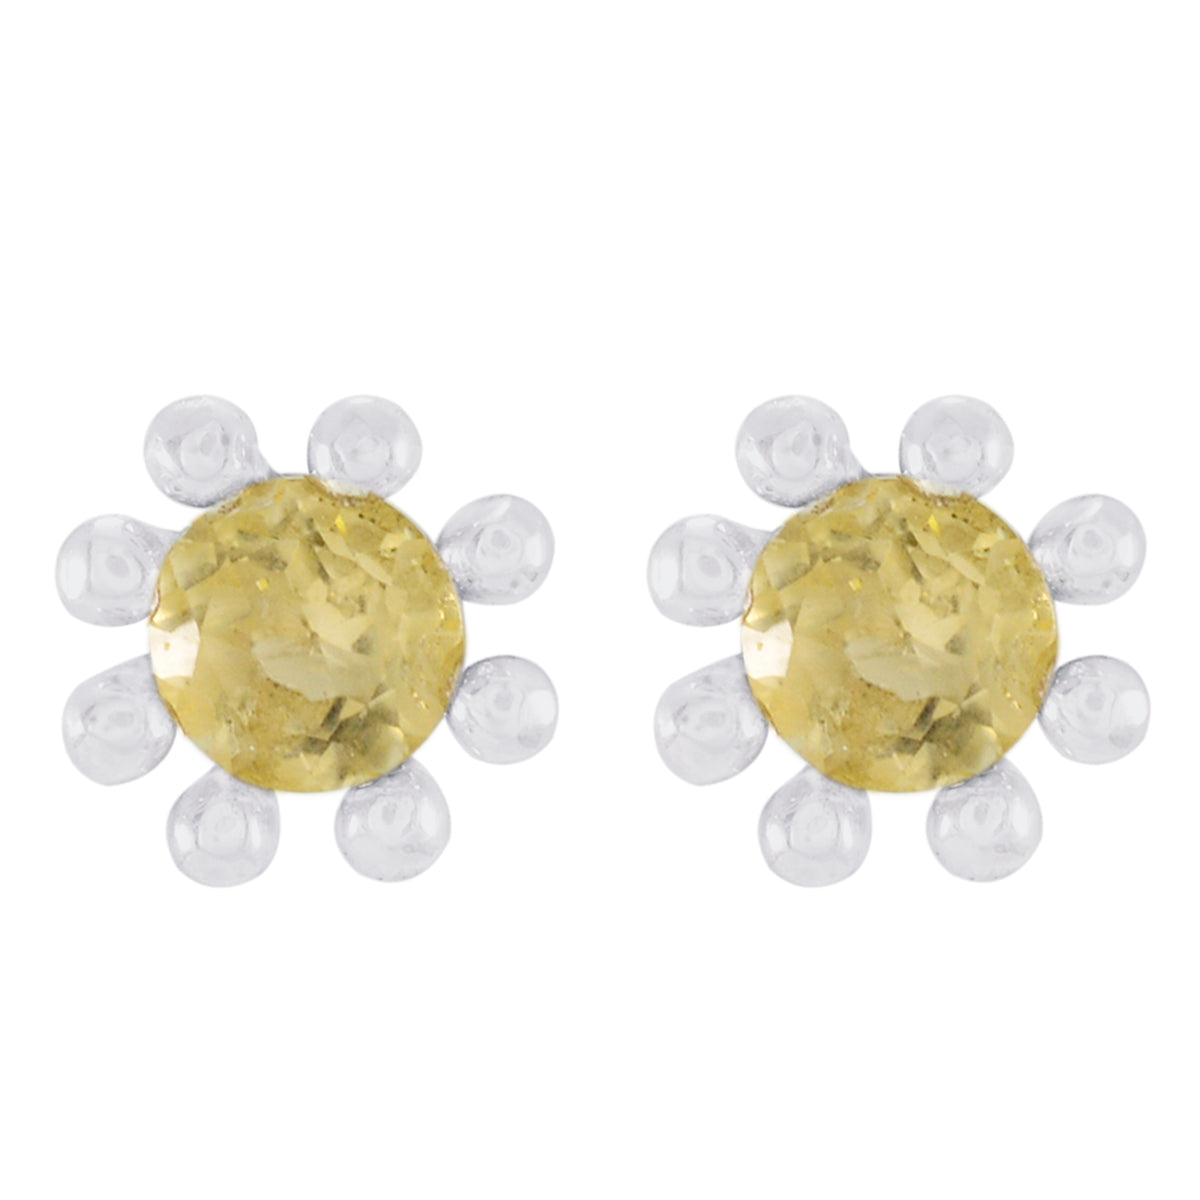 Riyo Nice Gemstone round Faceted Yellow Citrine Silver Earrings gift fordaughter day